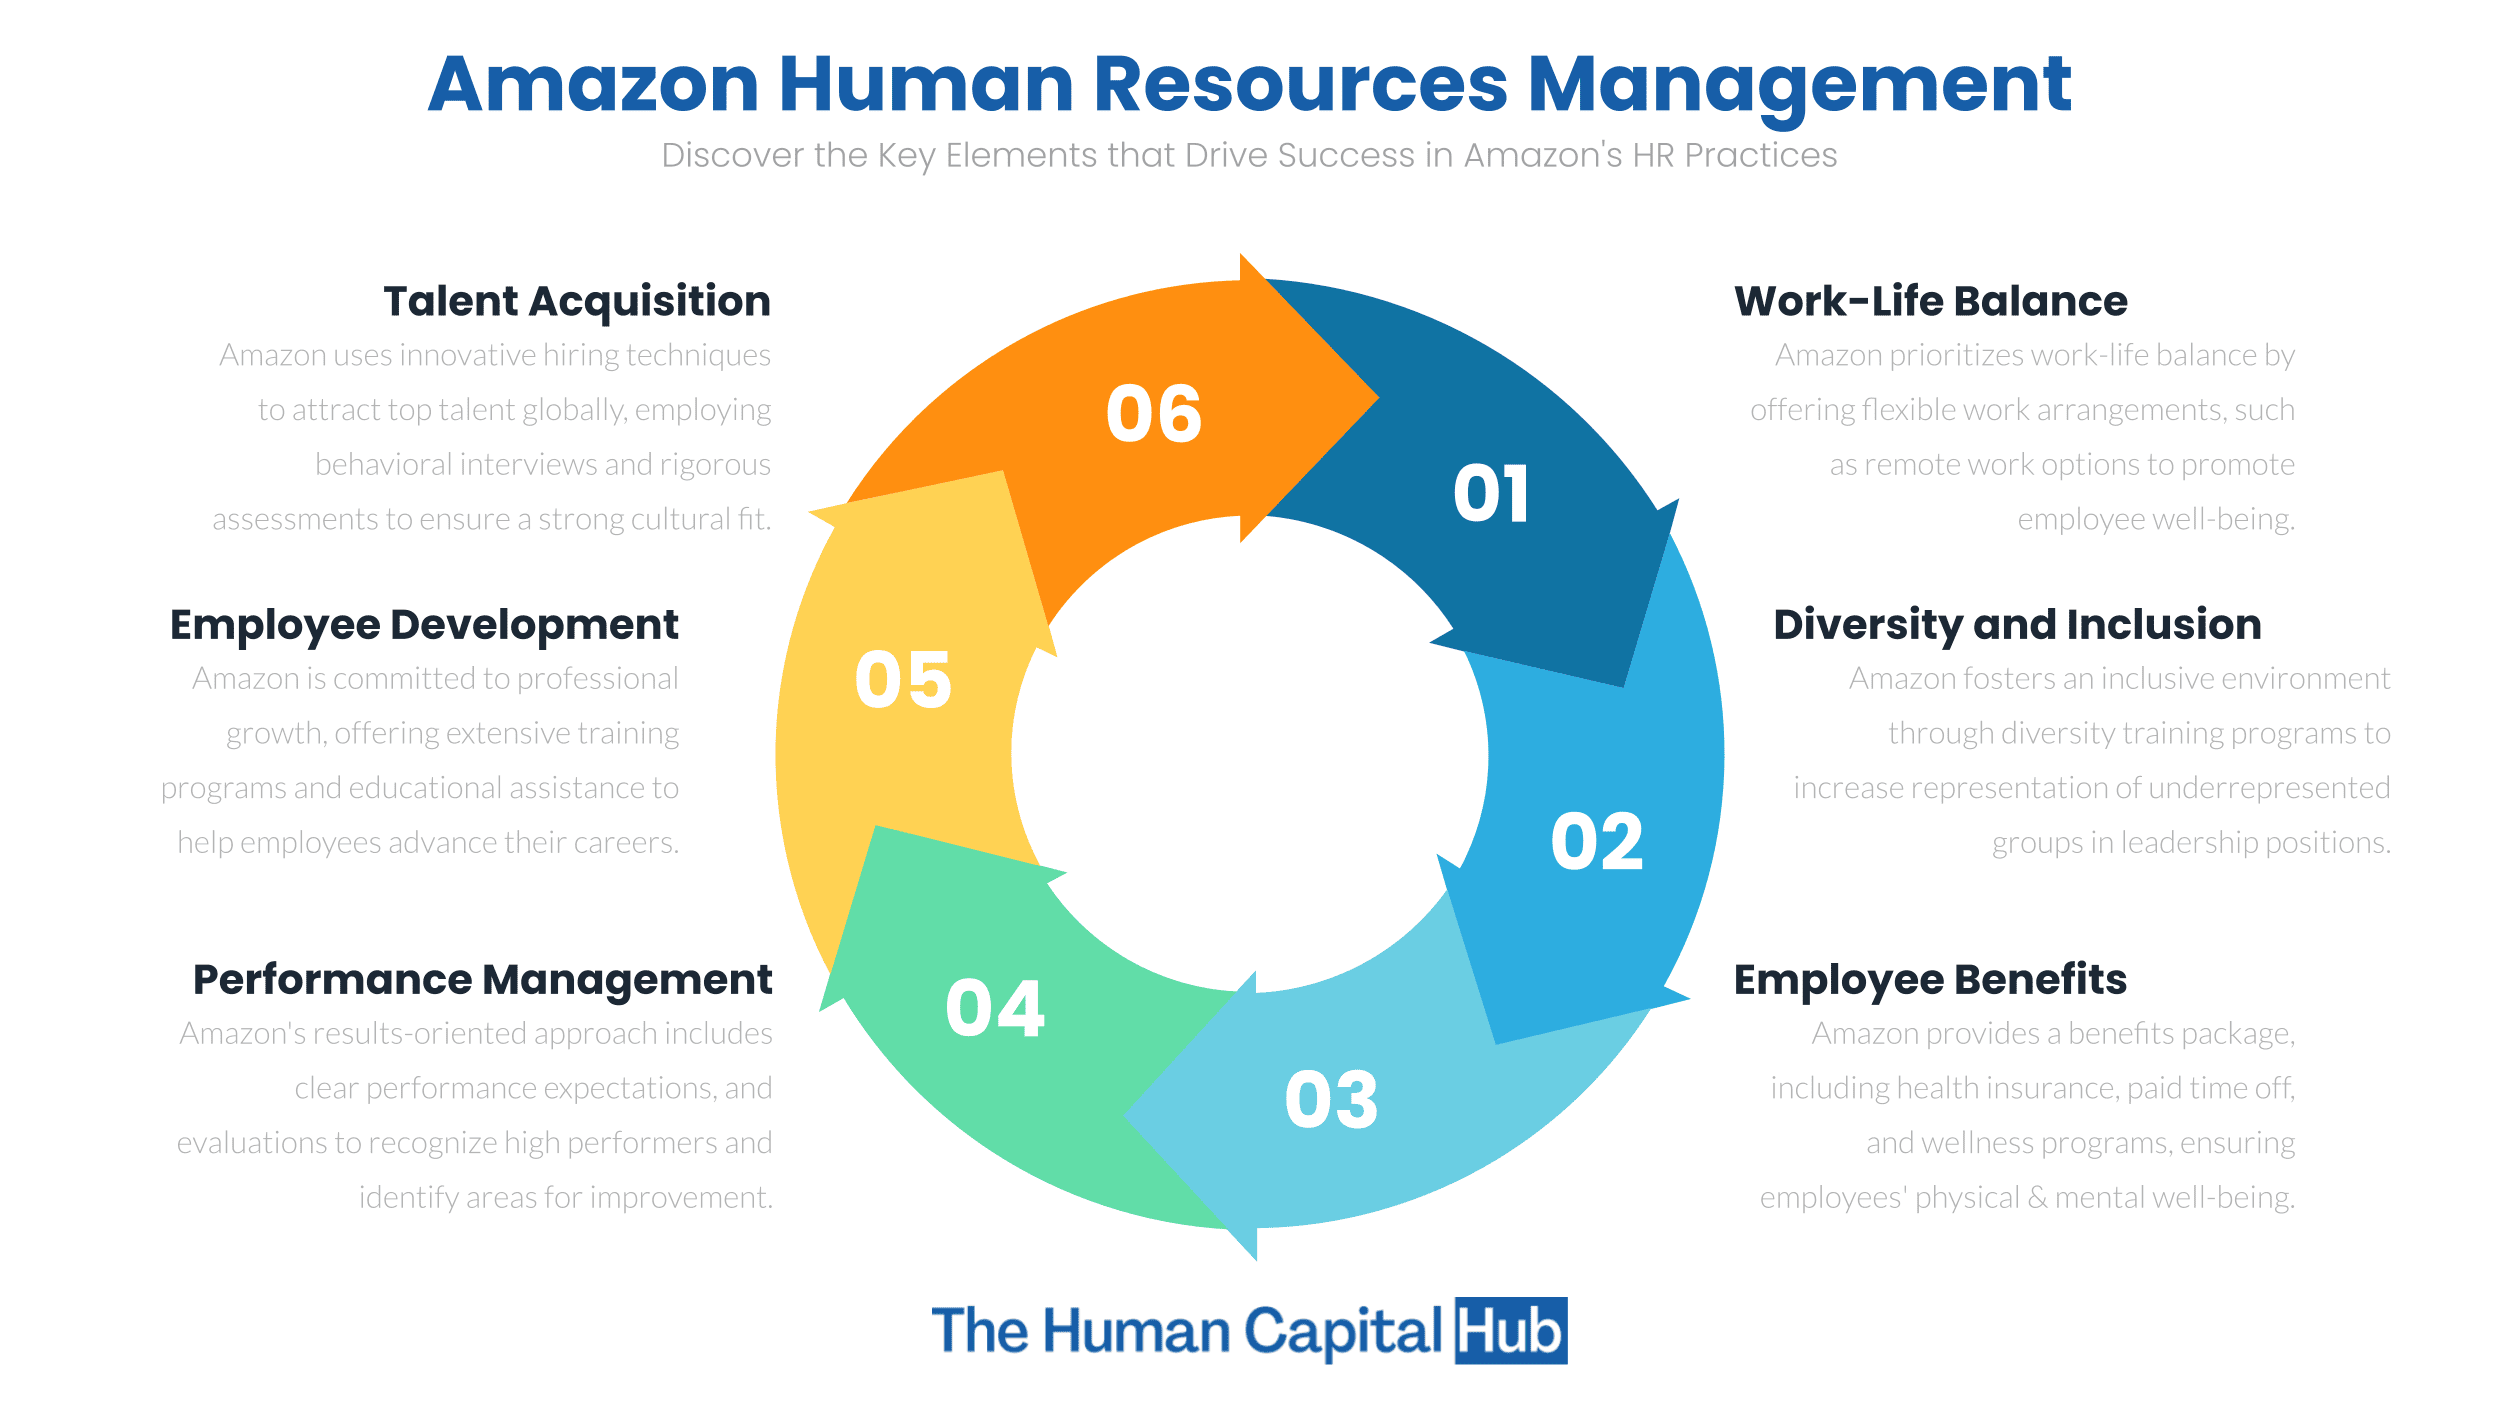 Amazon Human Resources Management: What you Need to Know